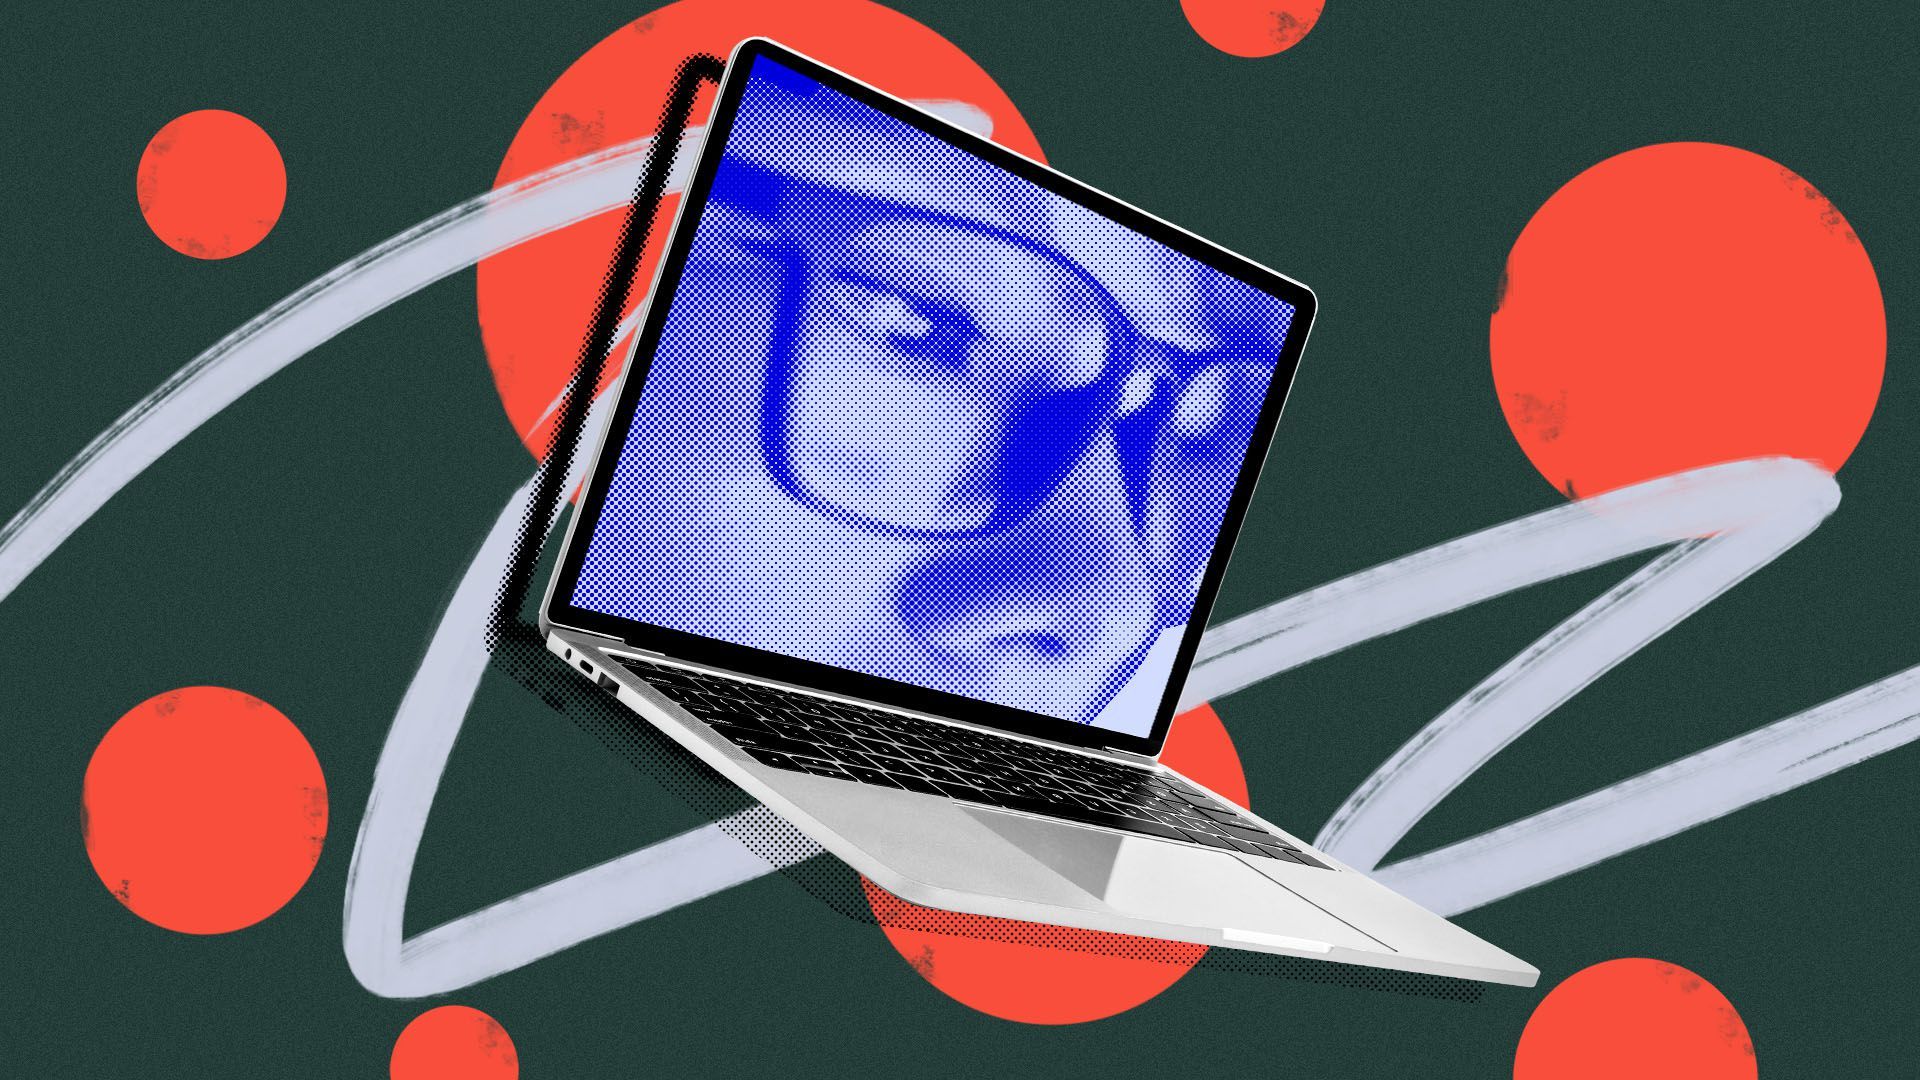 Illustration of a laptop with a woman on the screen surrounded by circles and shapes